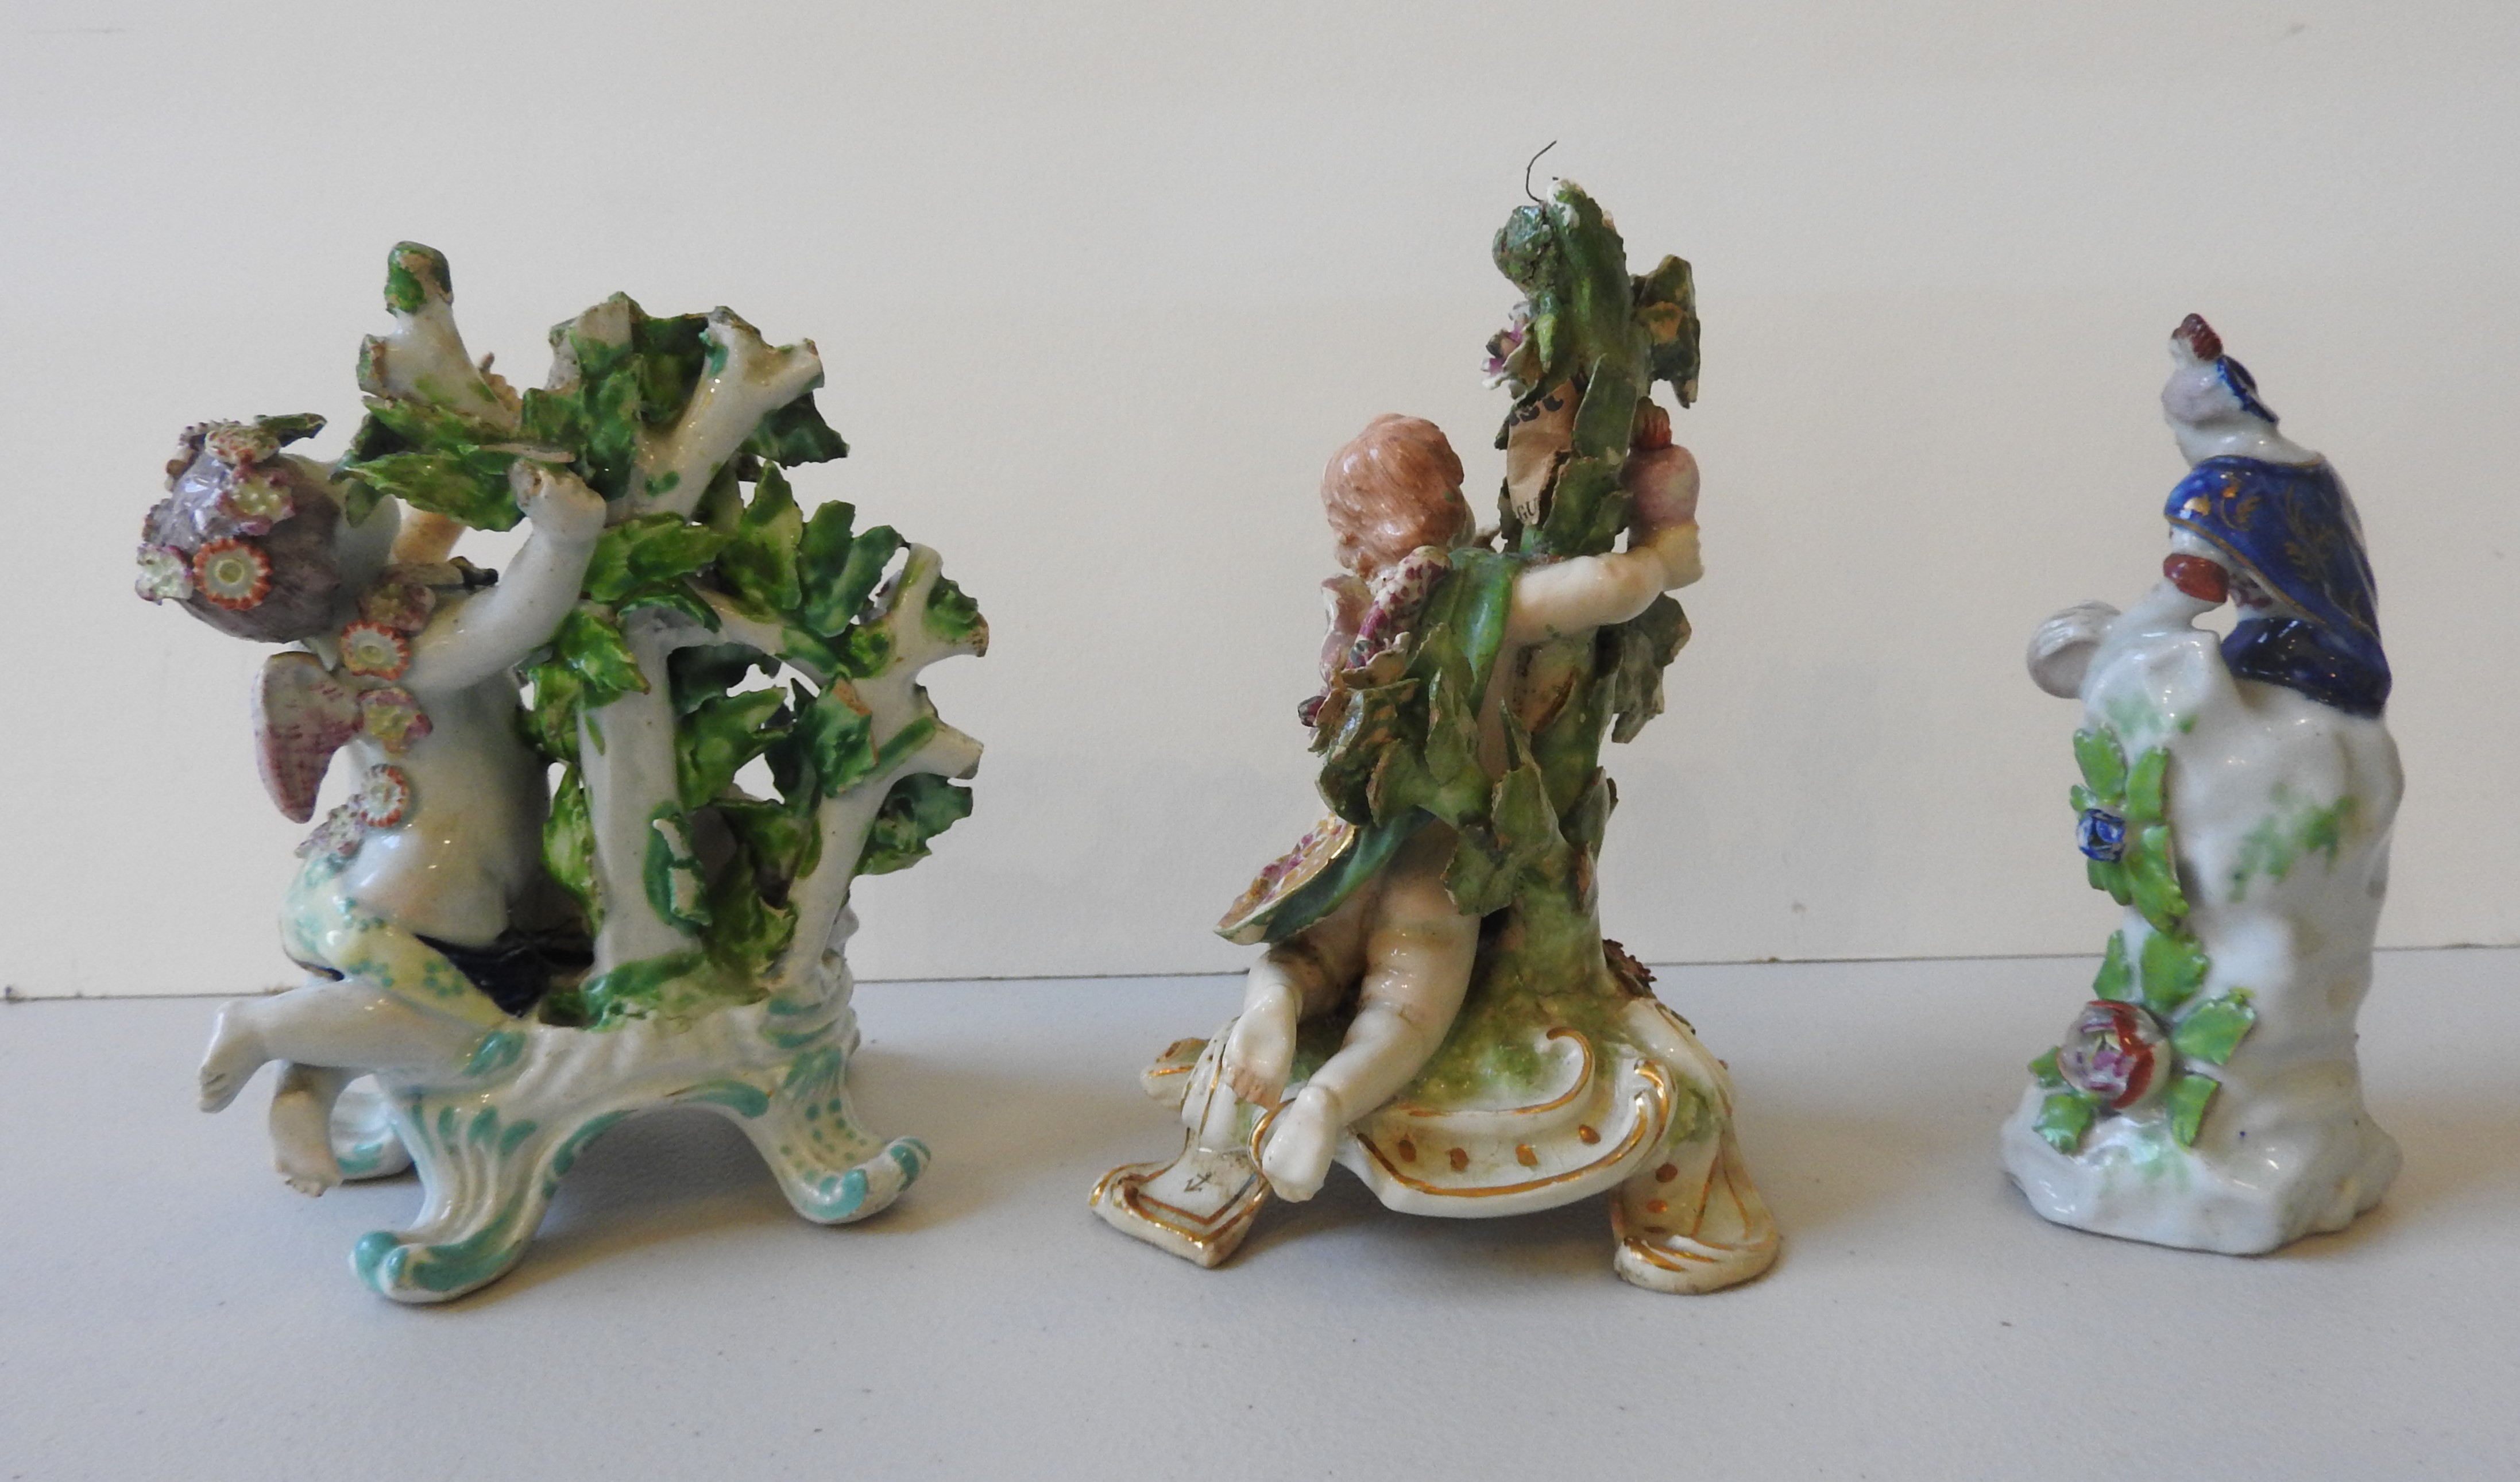 A BOW BOCAGE FIGURE OF A CUPID WITH DOG, together with another cupid bocage figure and a figurine - Image 4 of 4